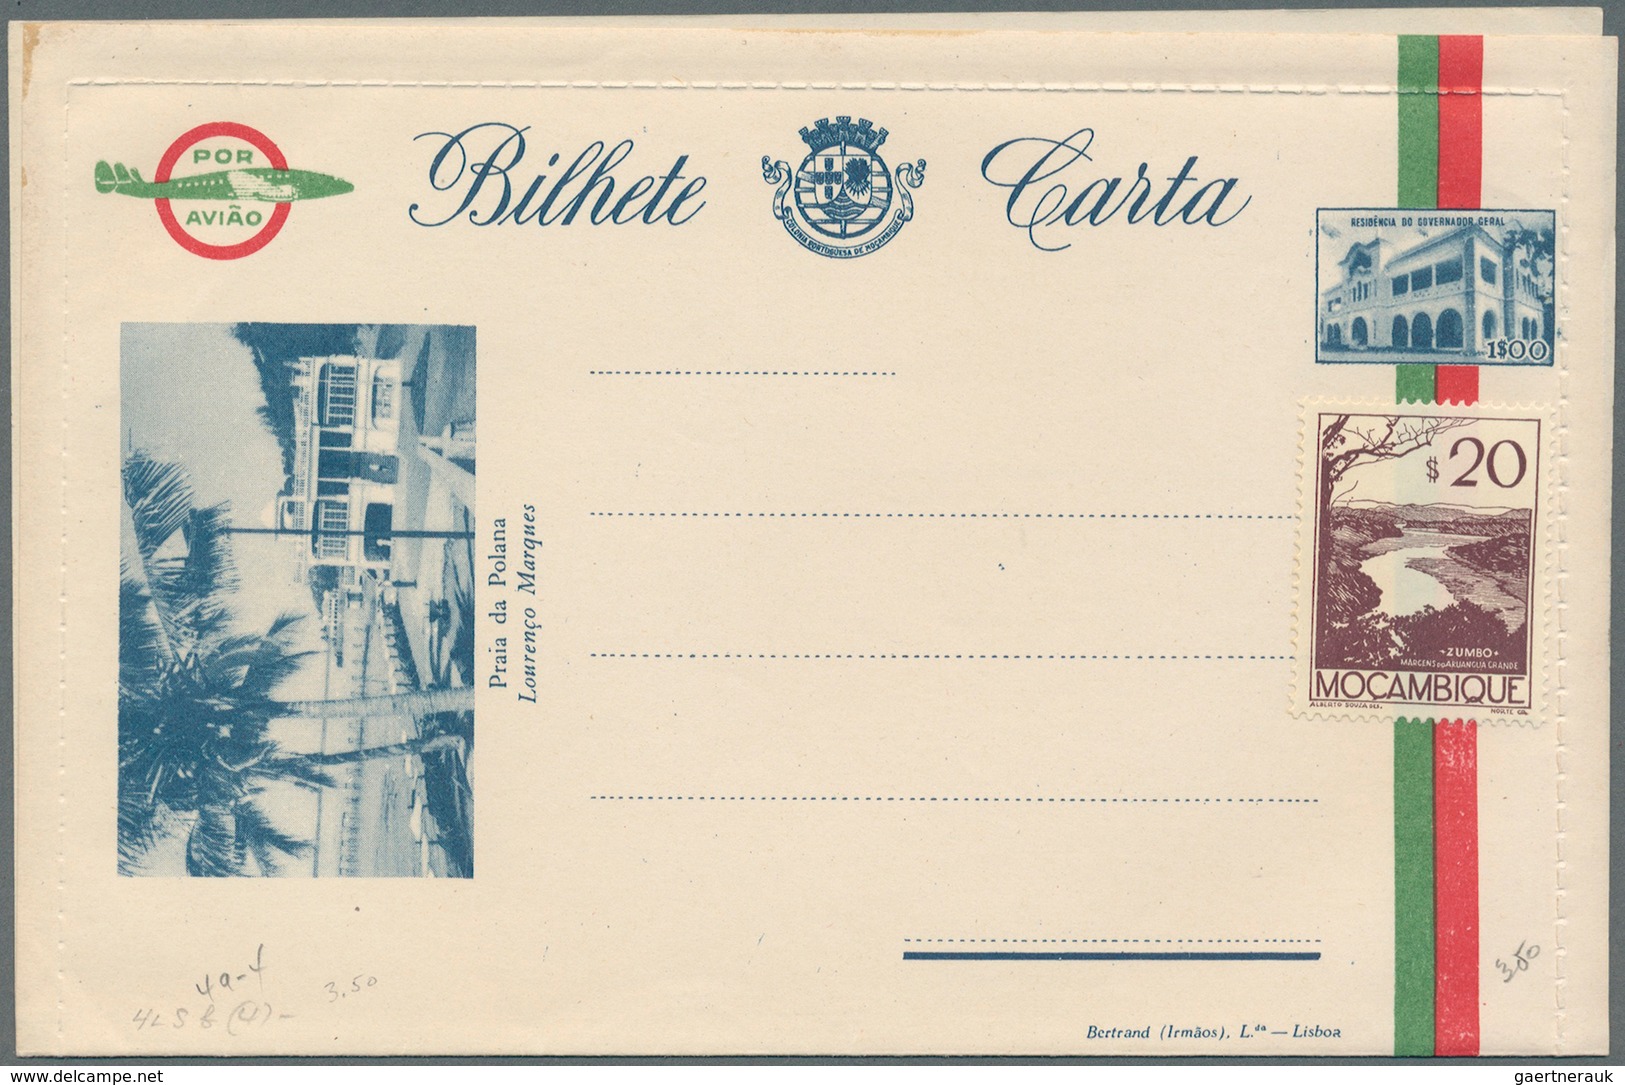 Mocambique: 1894/1985, 192 covers, cards, ancient picture postcards, arimail, many good postal stati